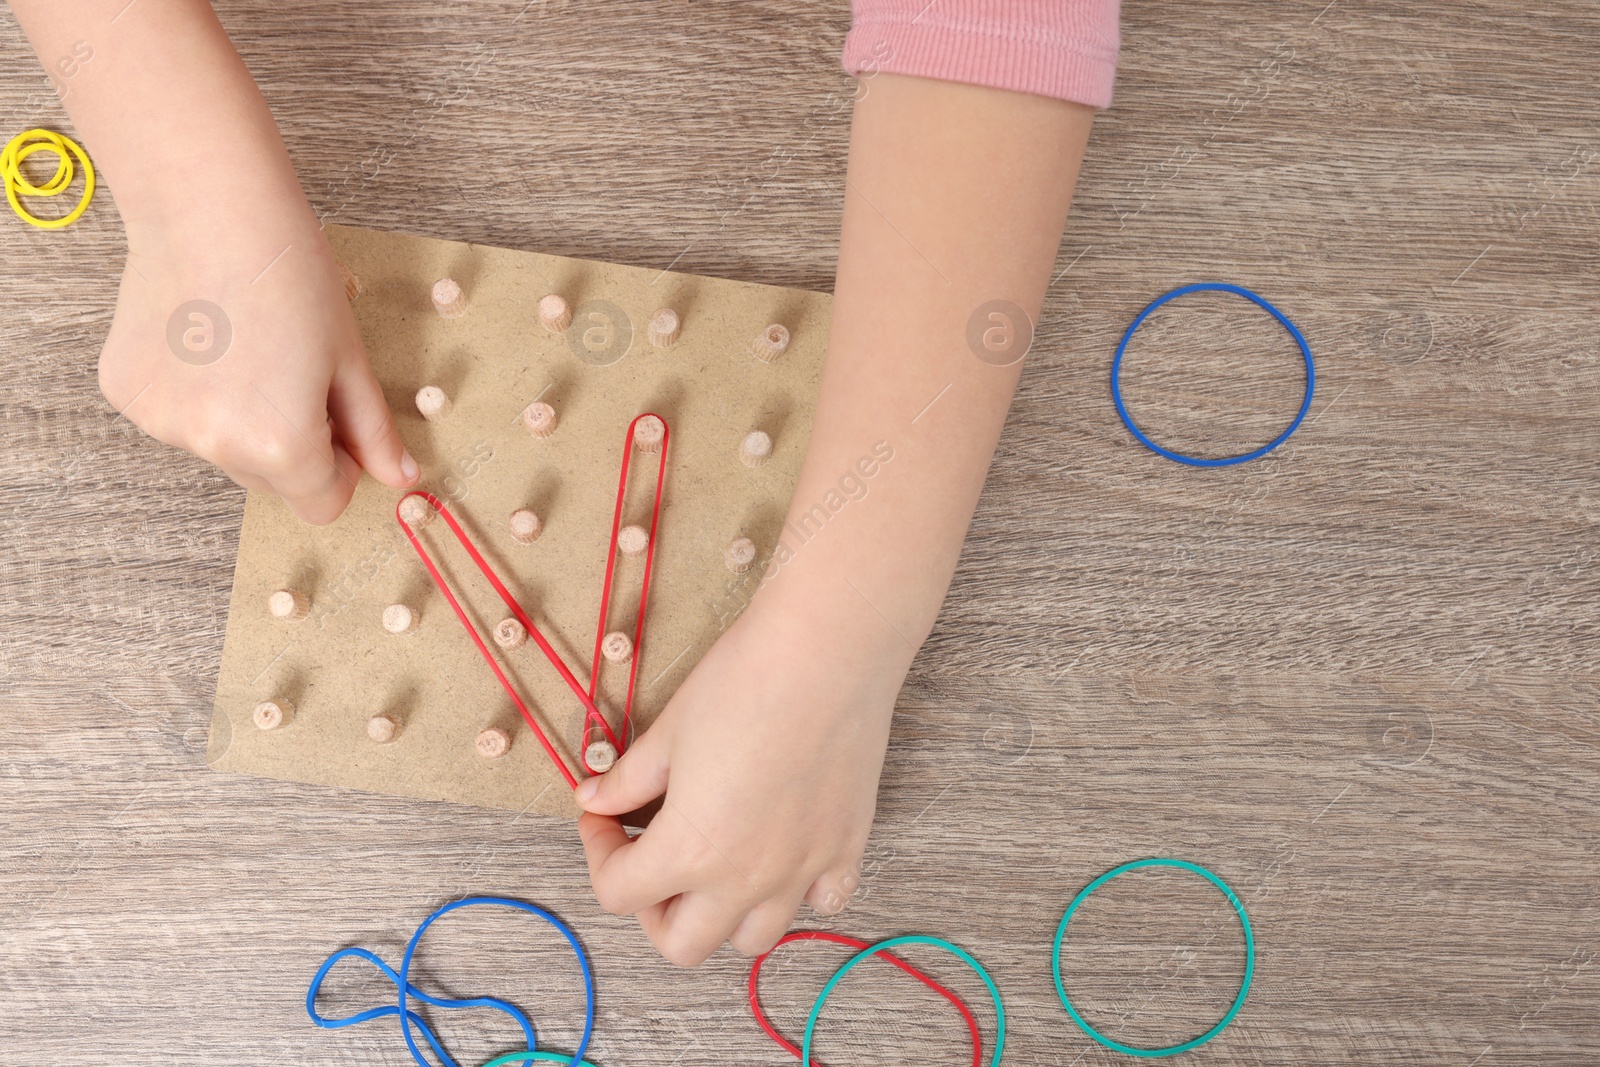 Photo of Motor skills development. Girl playing with geoboard and rubber bands at wooden table, top view